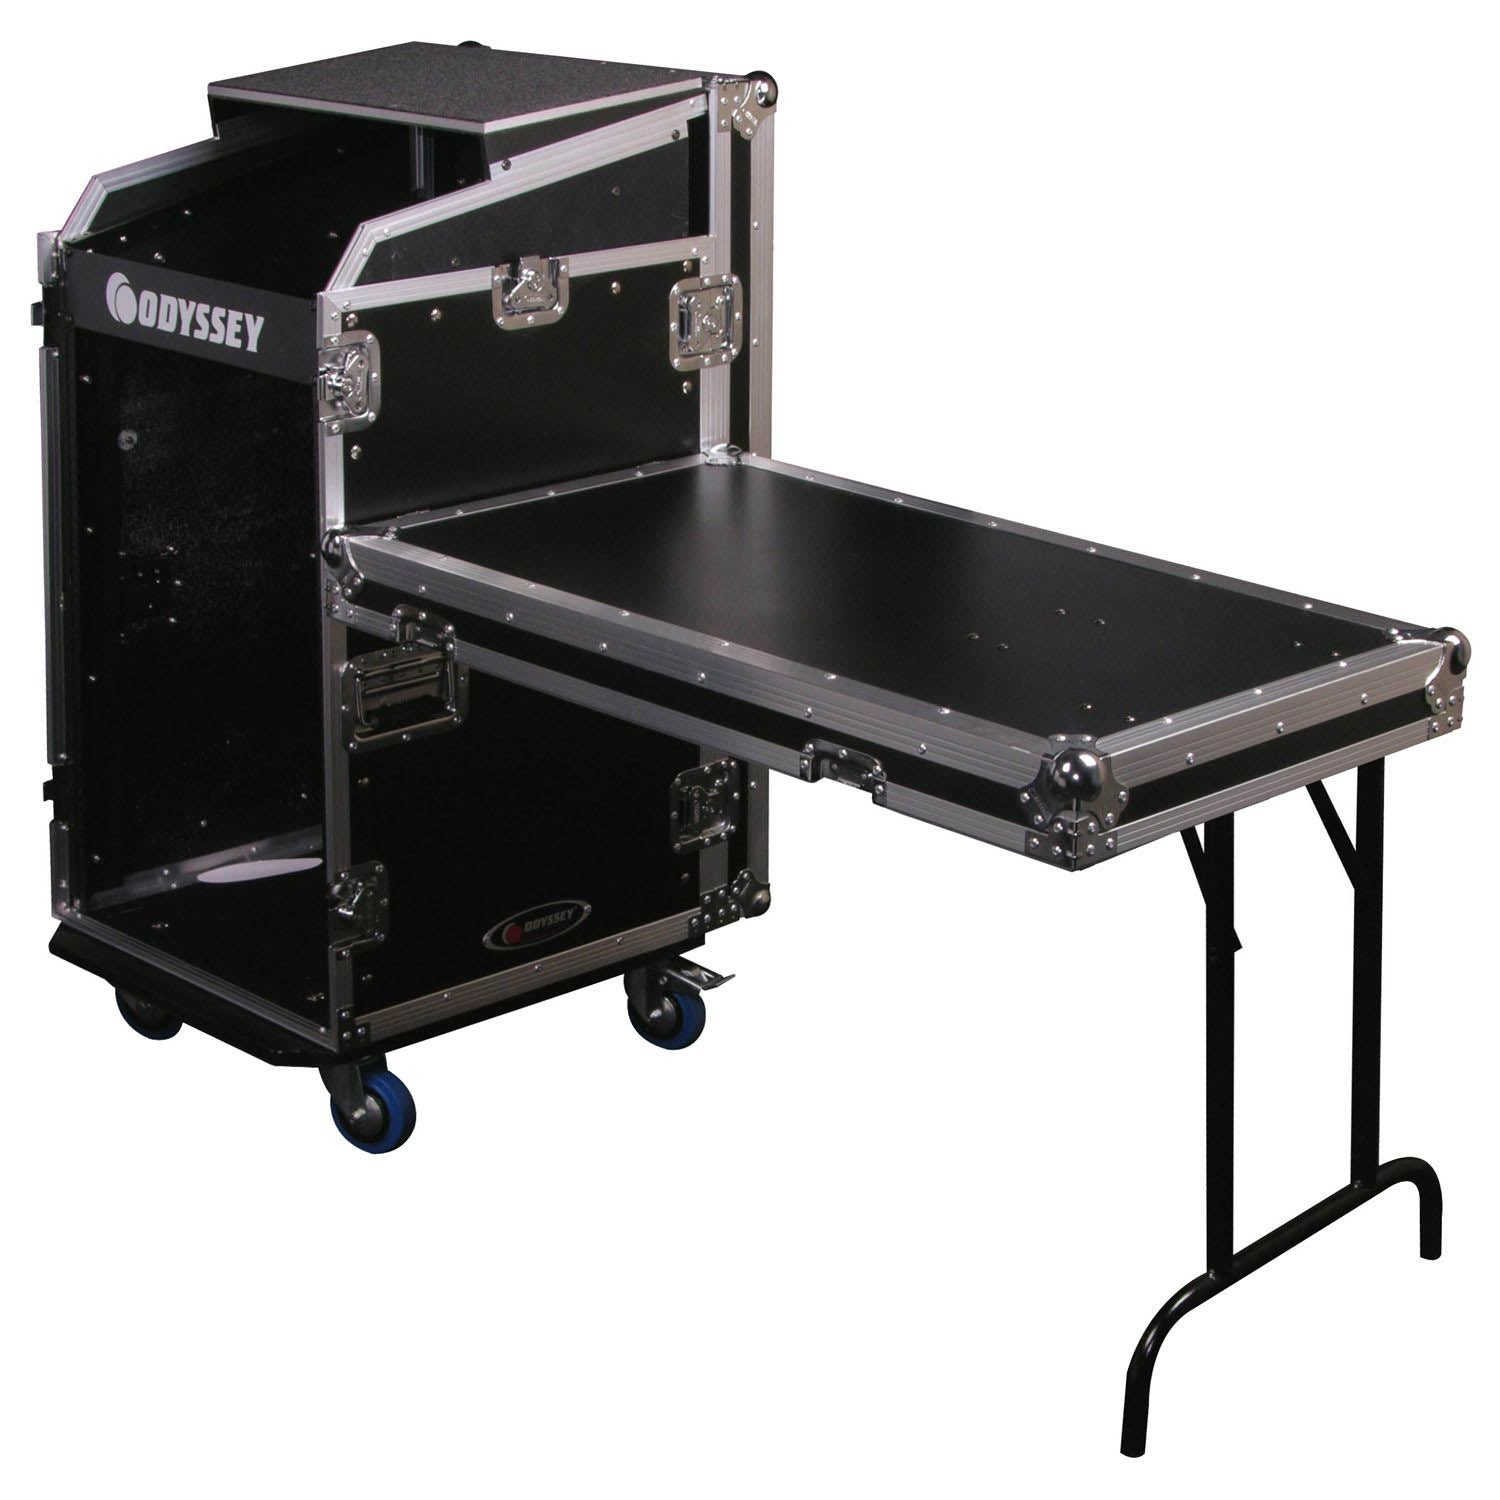 B-Stock: Odyssey FZGS1116WDLX Deluxe 11U Top Slanted 16U Bottom Vertical Pro Combo Rack with Casters, Side Table, and Glide Platform - Hollywood DJ